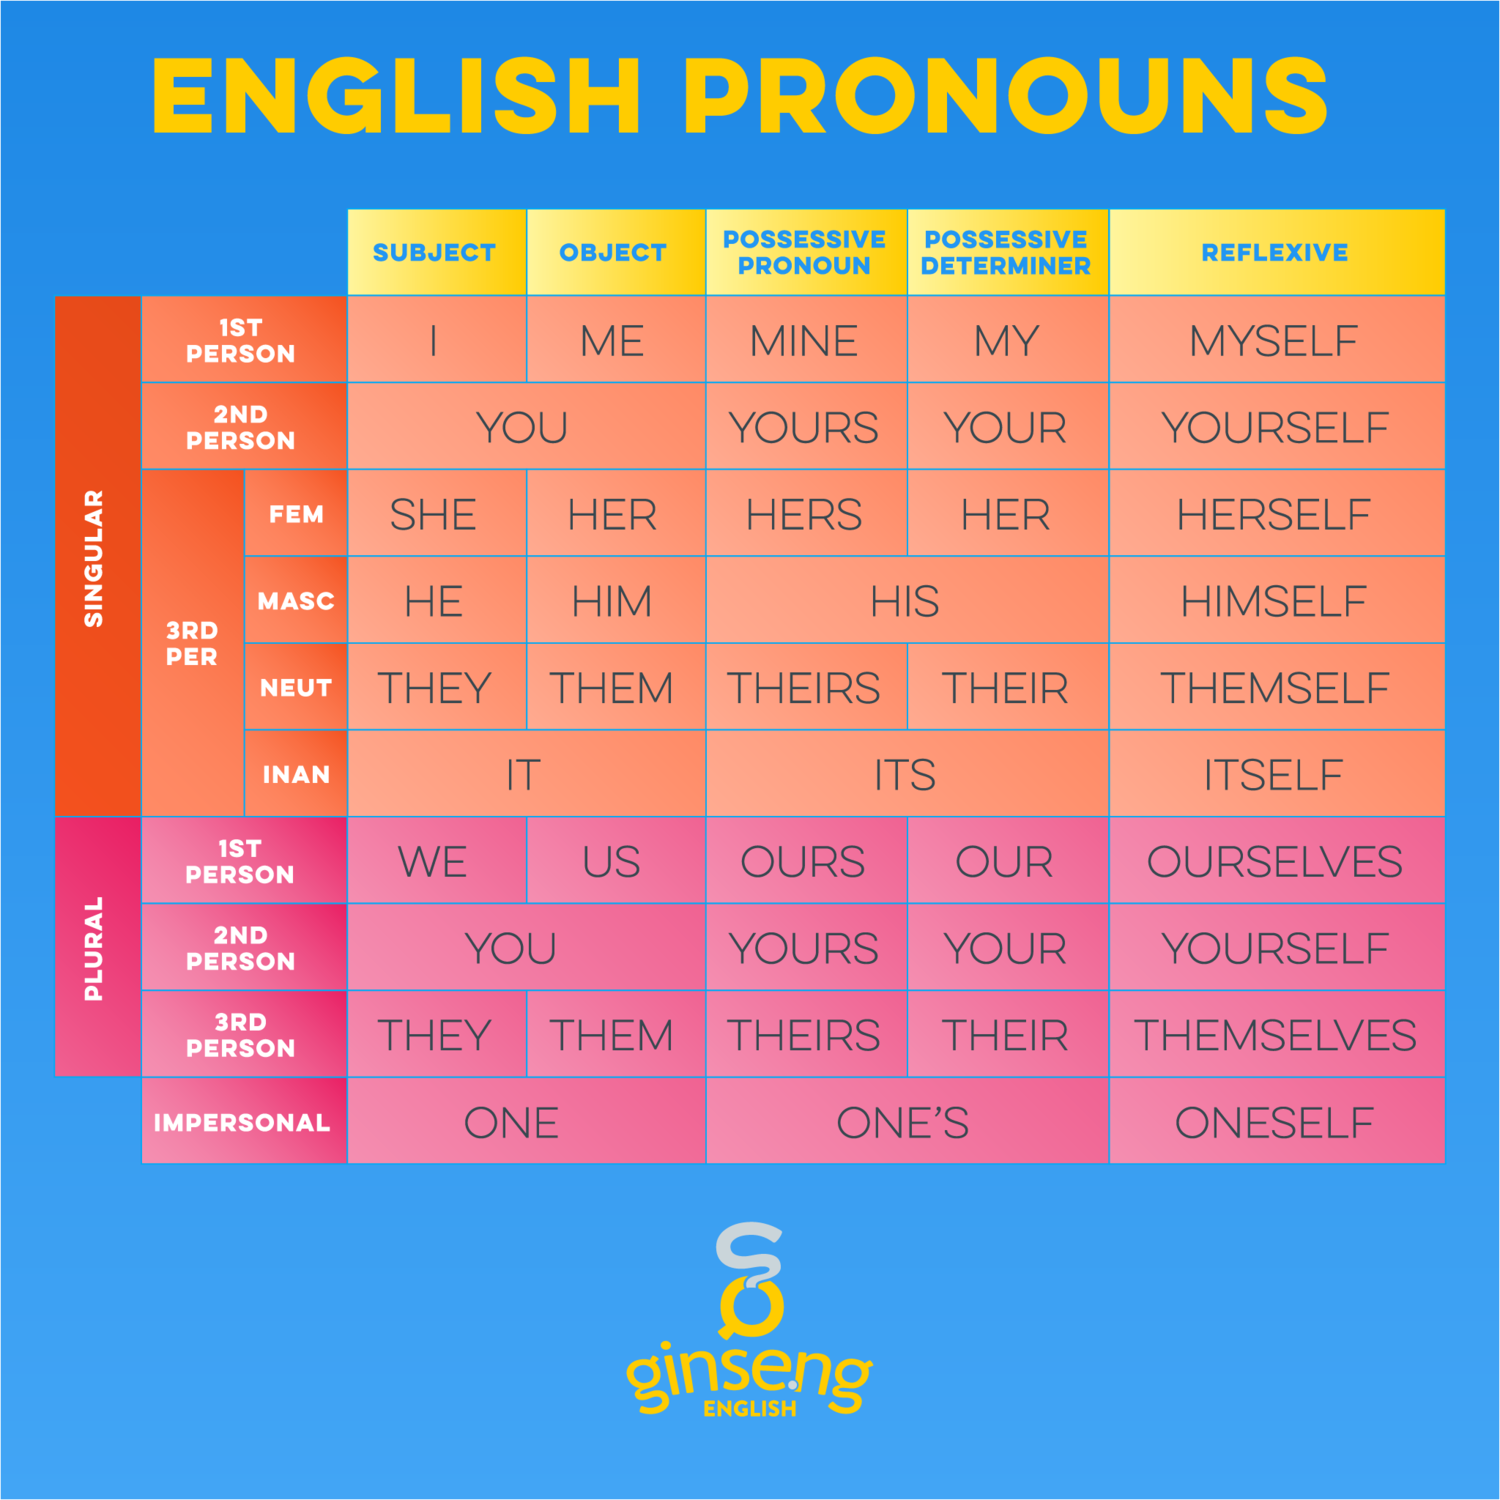 What Is Pronoun For 2nd Class